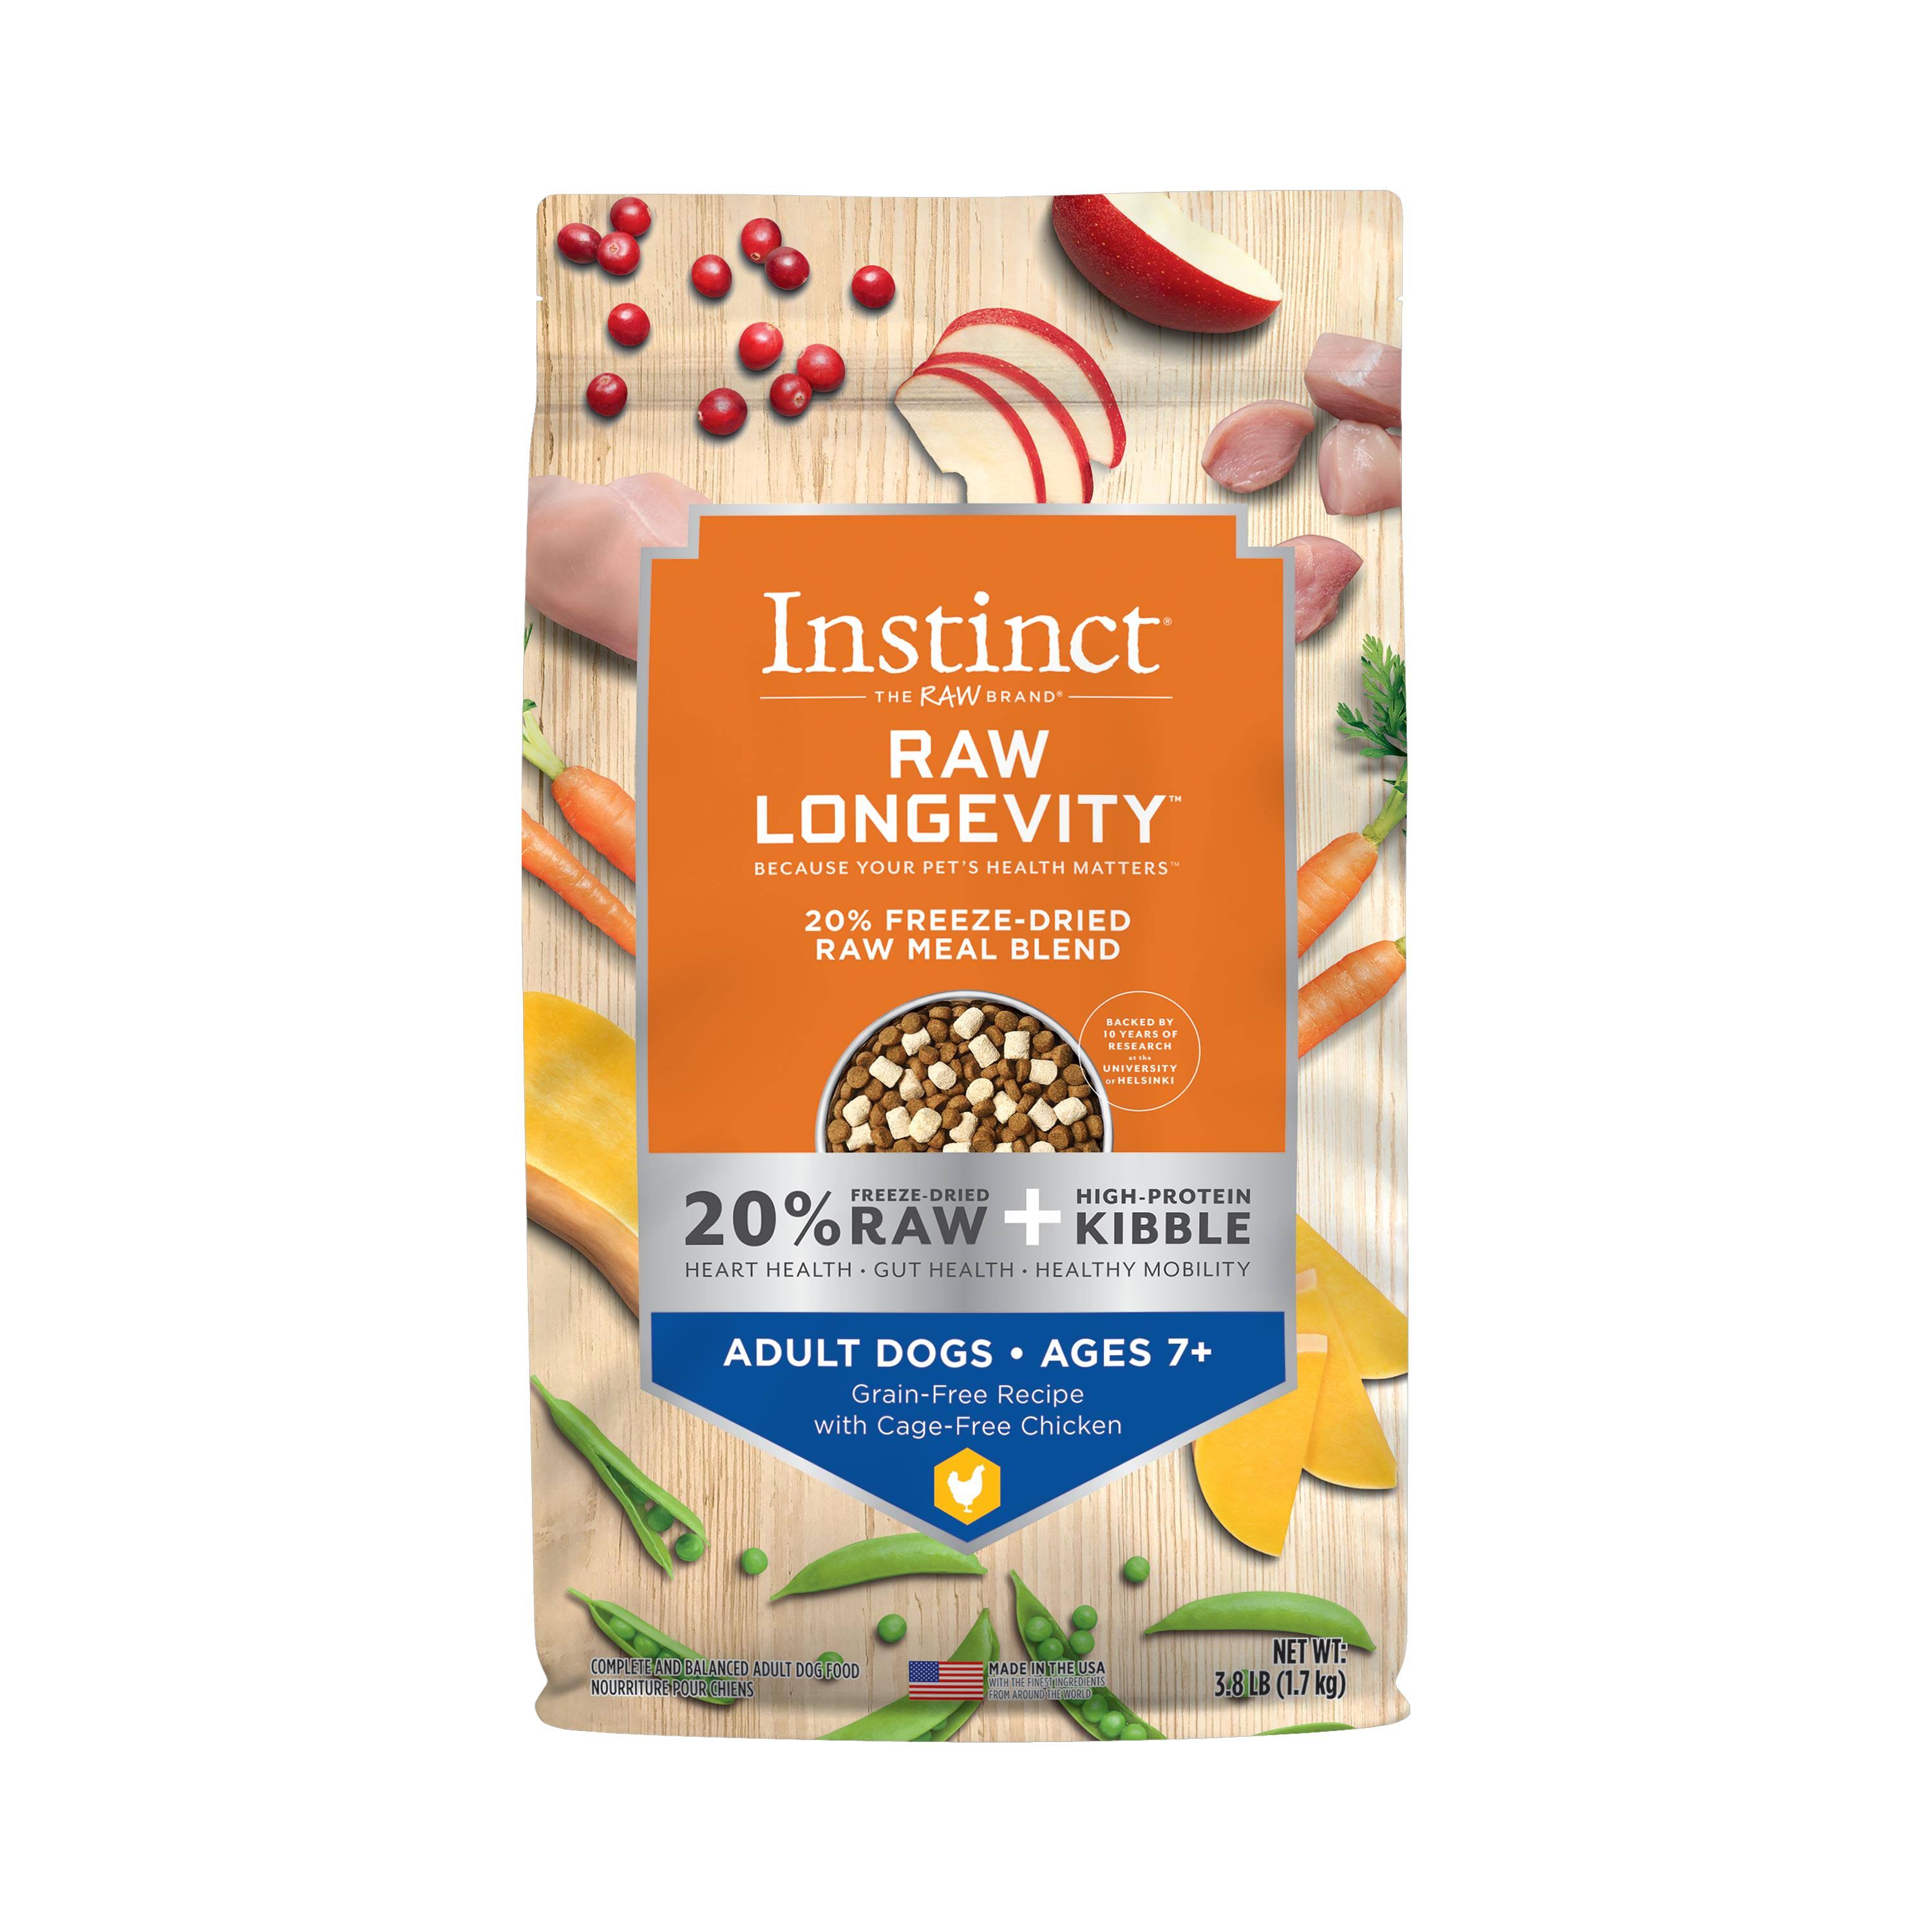 Instinct Raw Longevity 20% Freeze-Dried Raw Meal Blend Grain-Free Recipe with Cage-Free Chicken for Adult Dogs Ages 7+ 3.8 Kg